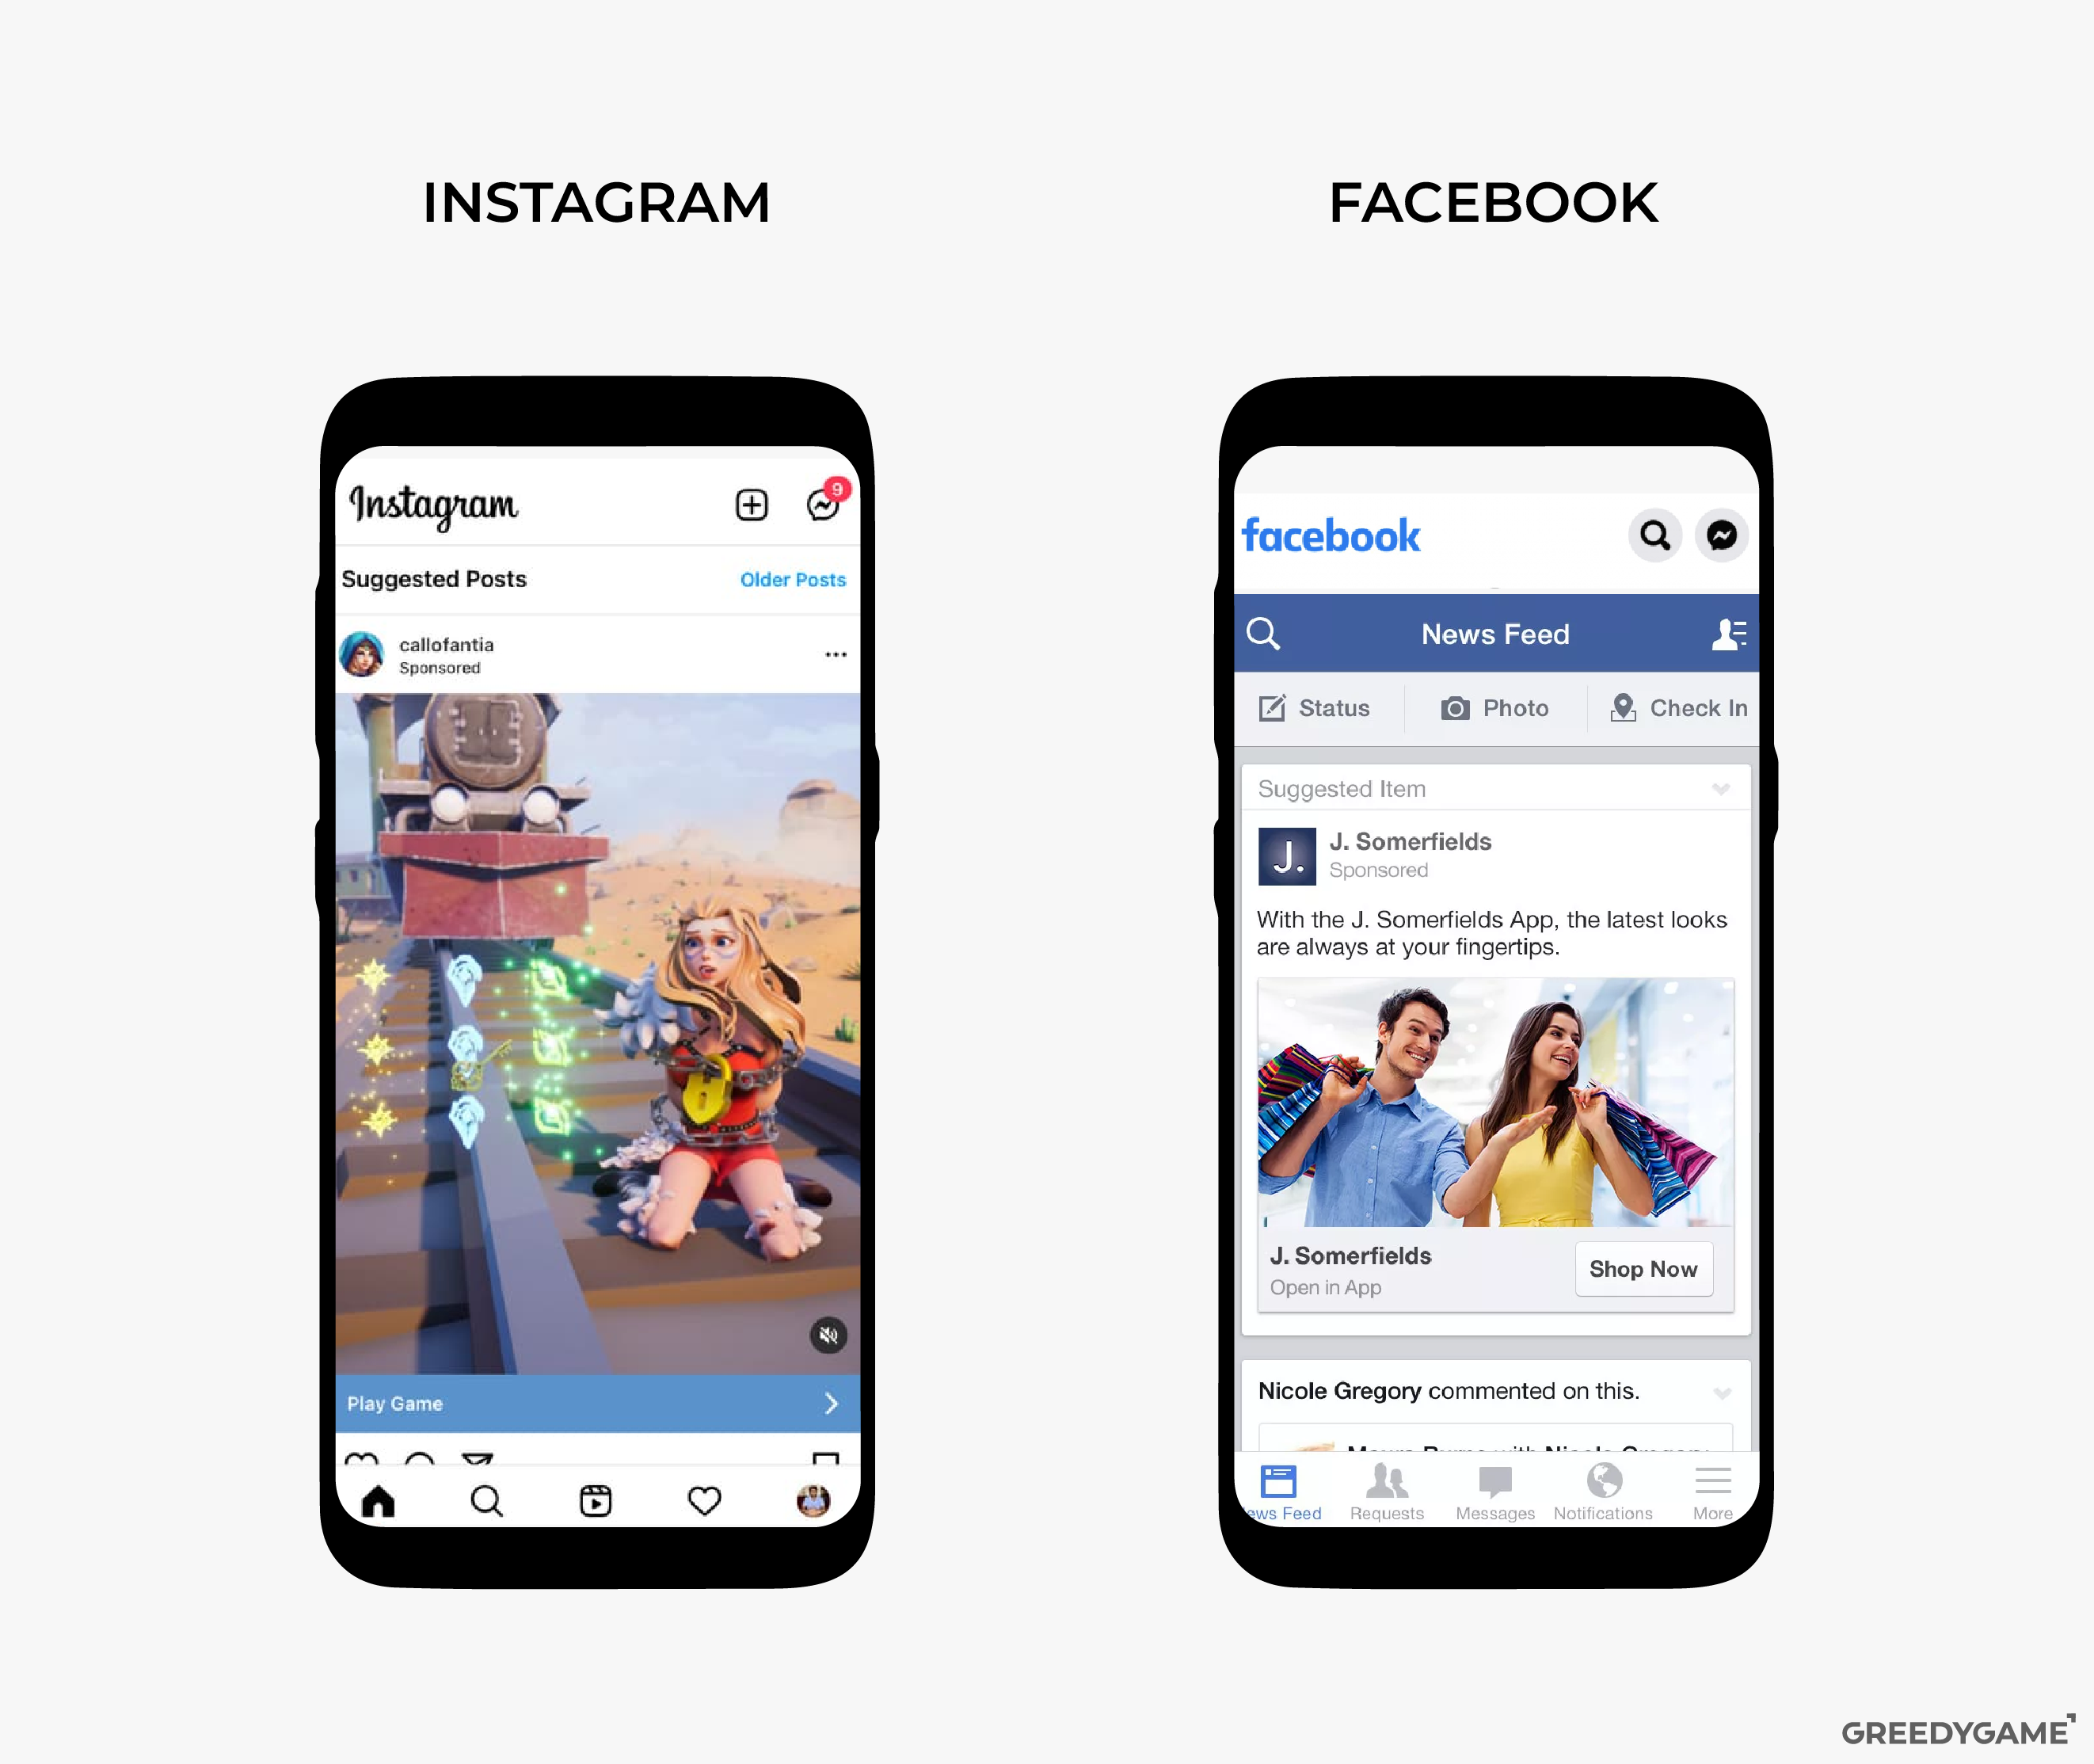 Screenshots of social media ads on Instagram and Facebook